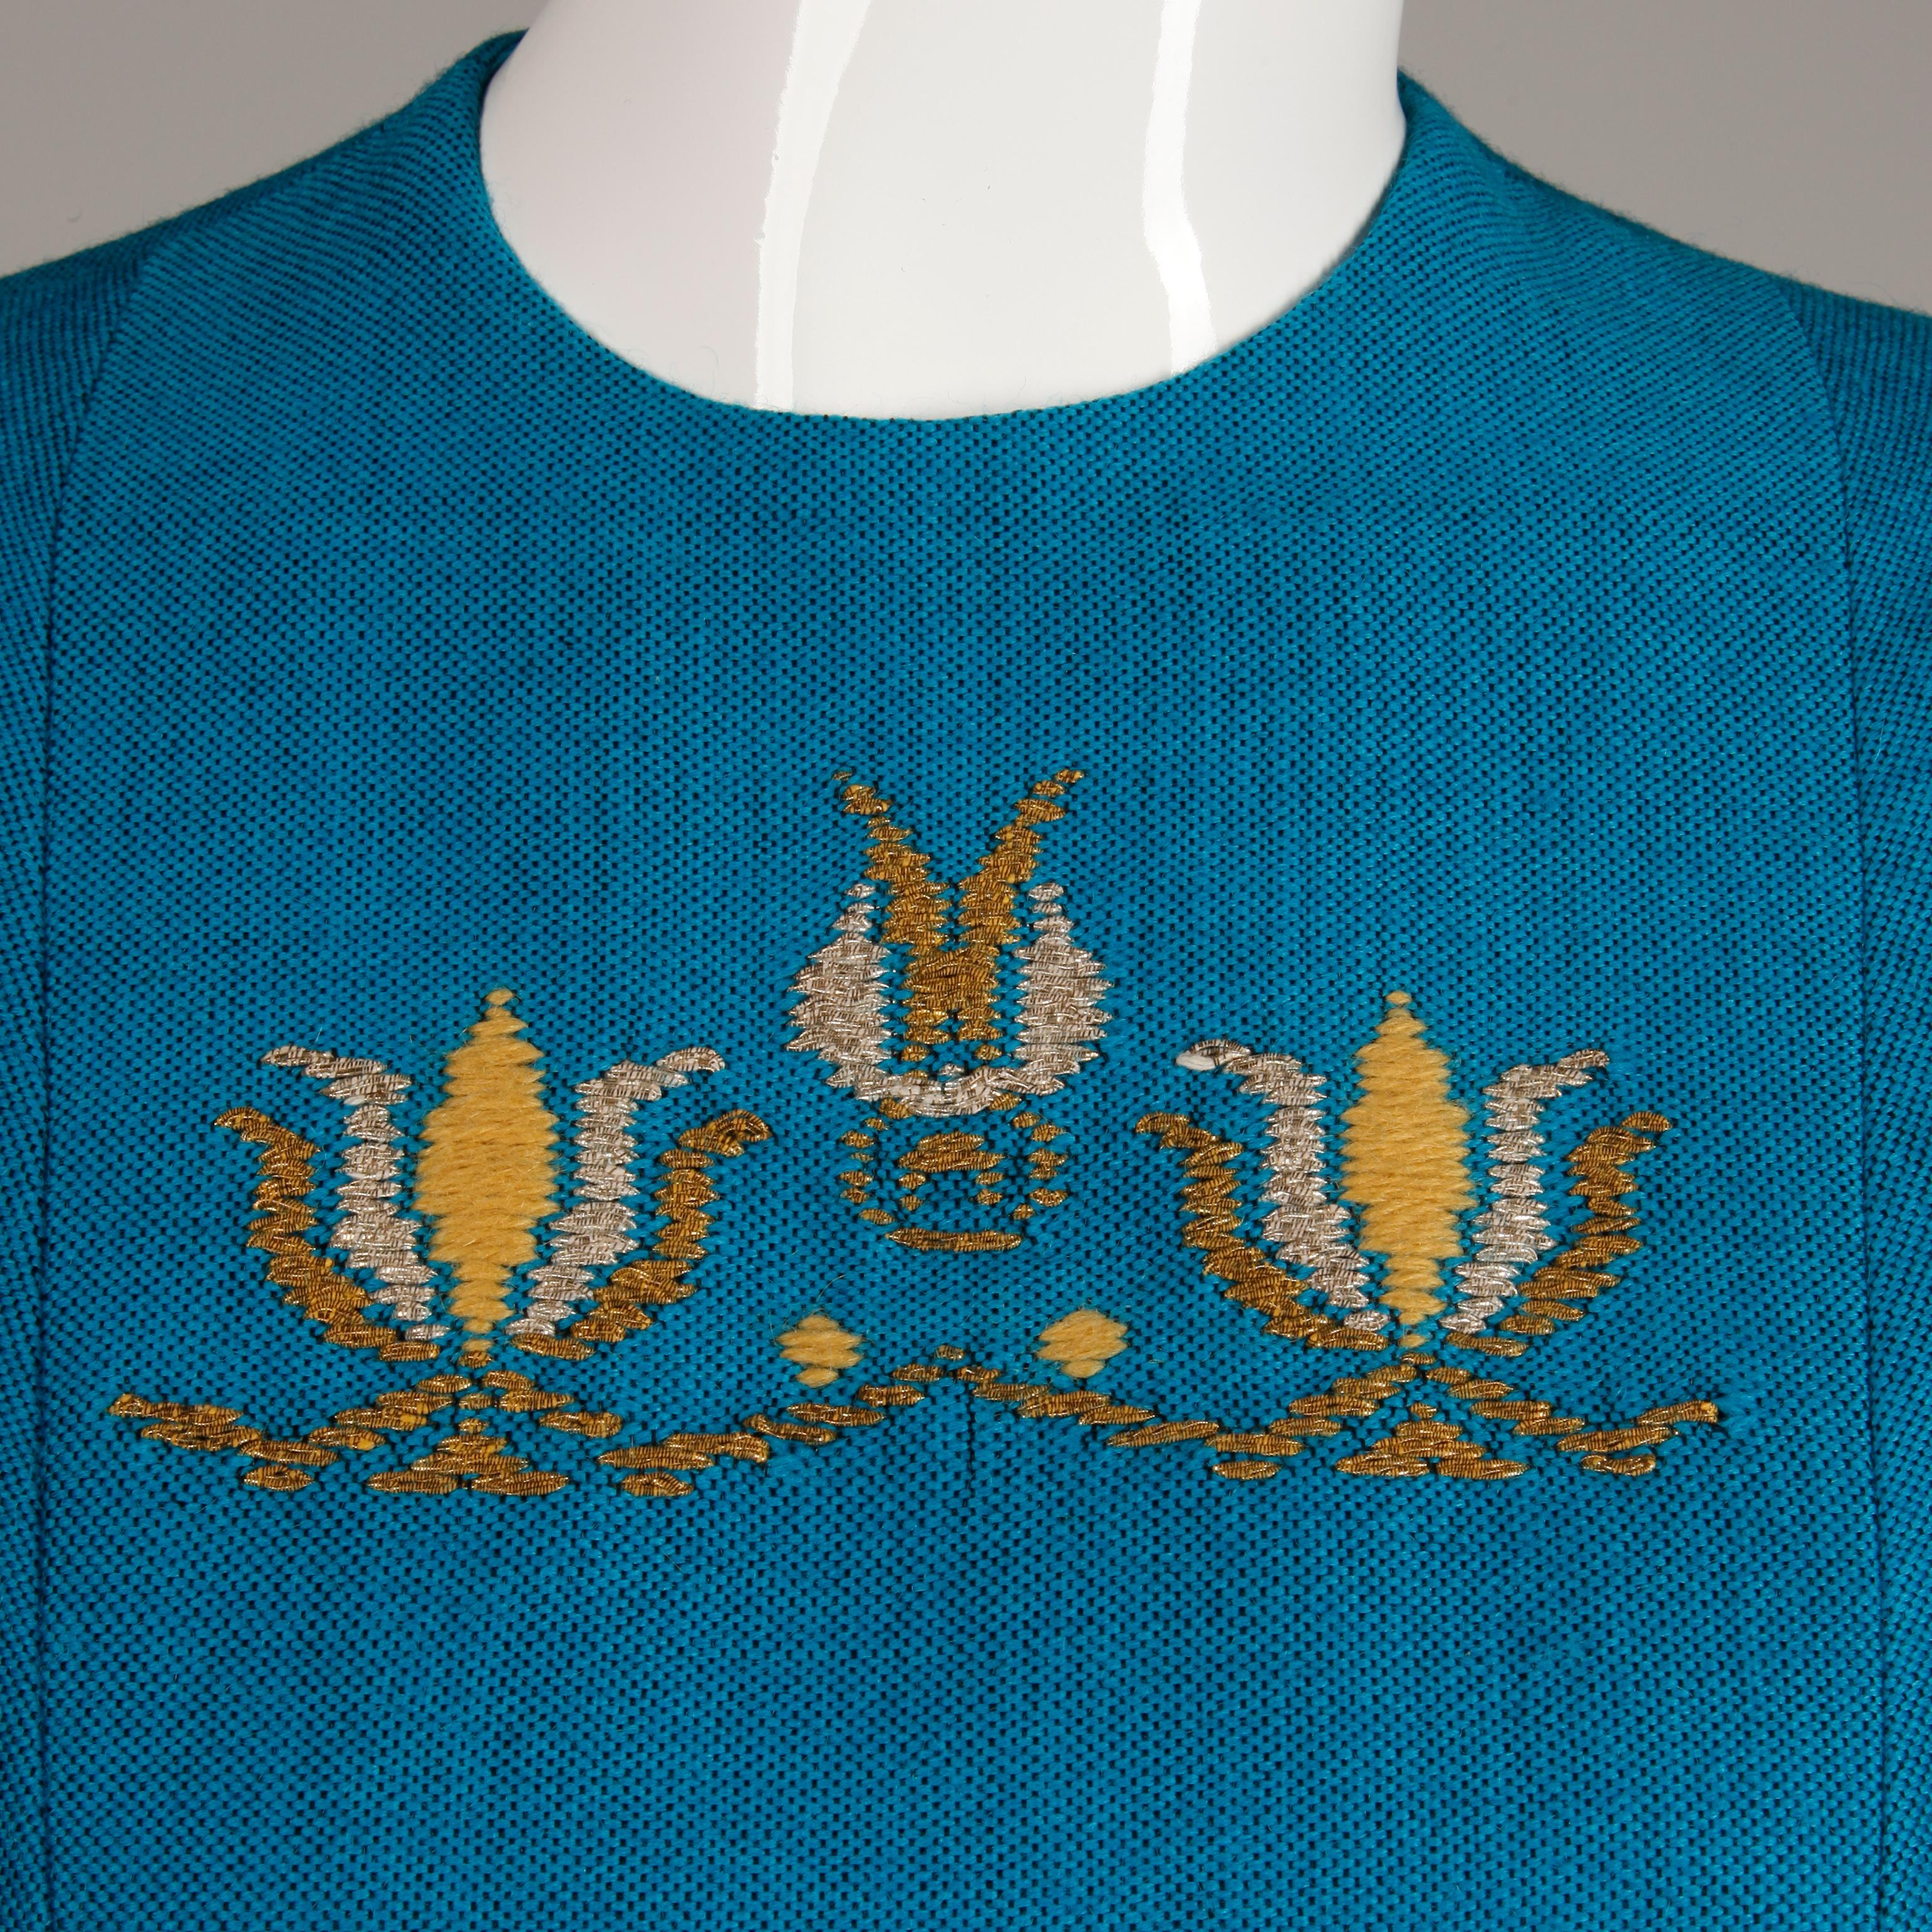 Rare 1960s Nikos-Takis Vintage Blue Shift Dress with Hand Embroidered Tulips For Sale 2